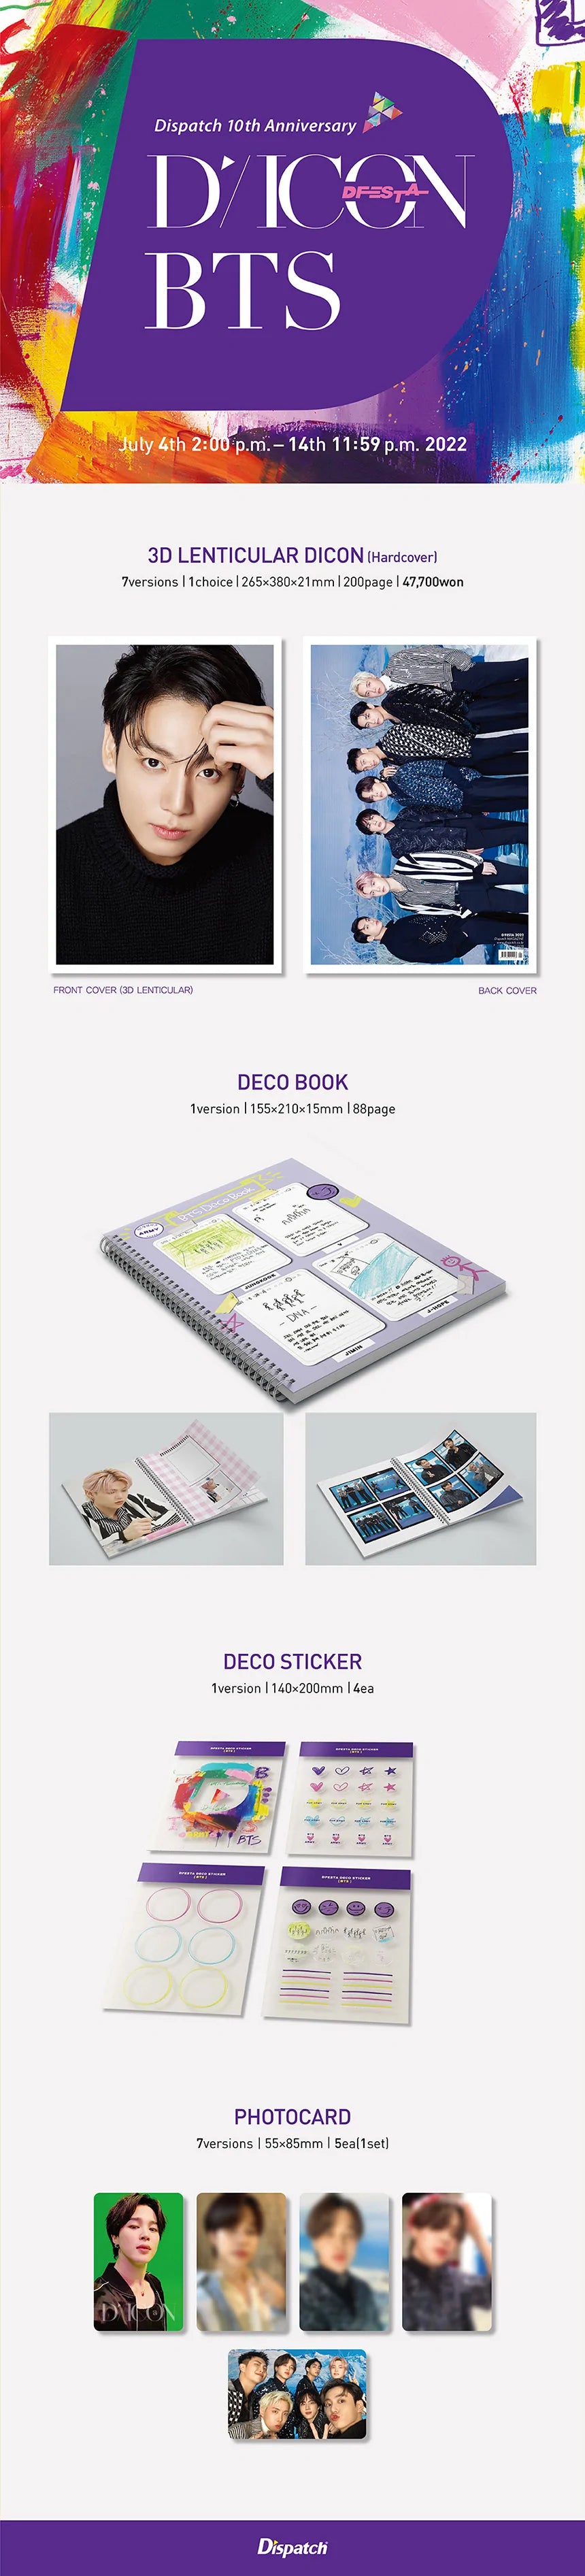 [IN-STORE PICKUP ONLY] BTS - DICON D'FESTA 10th Anniversary Photobook